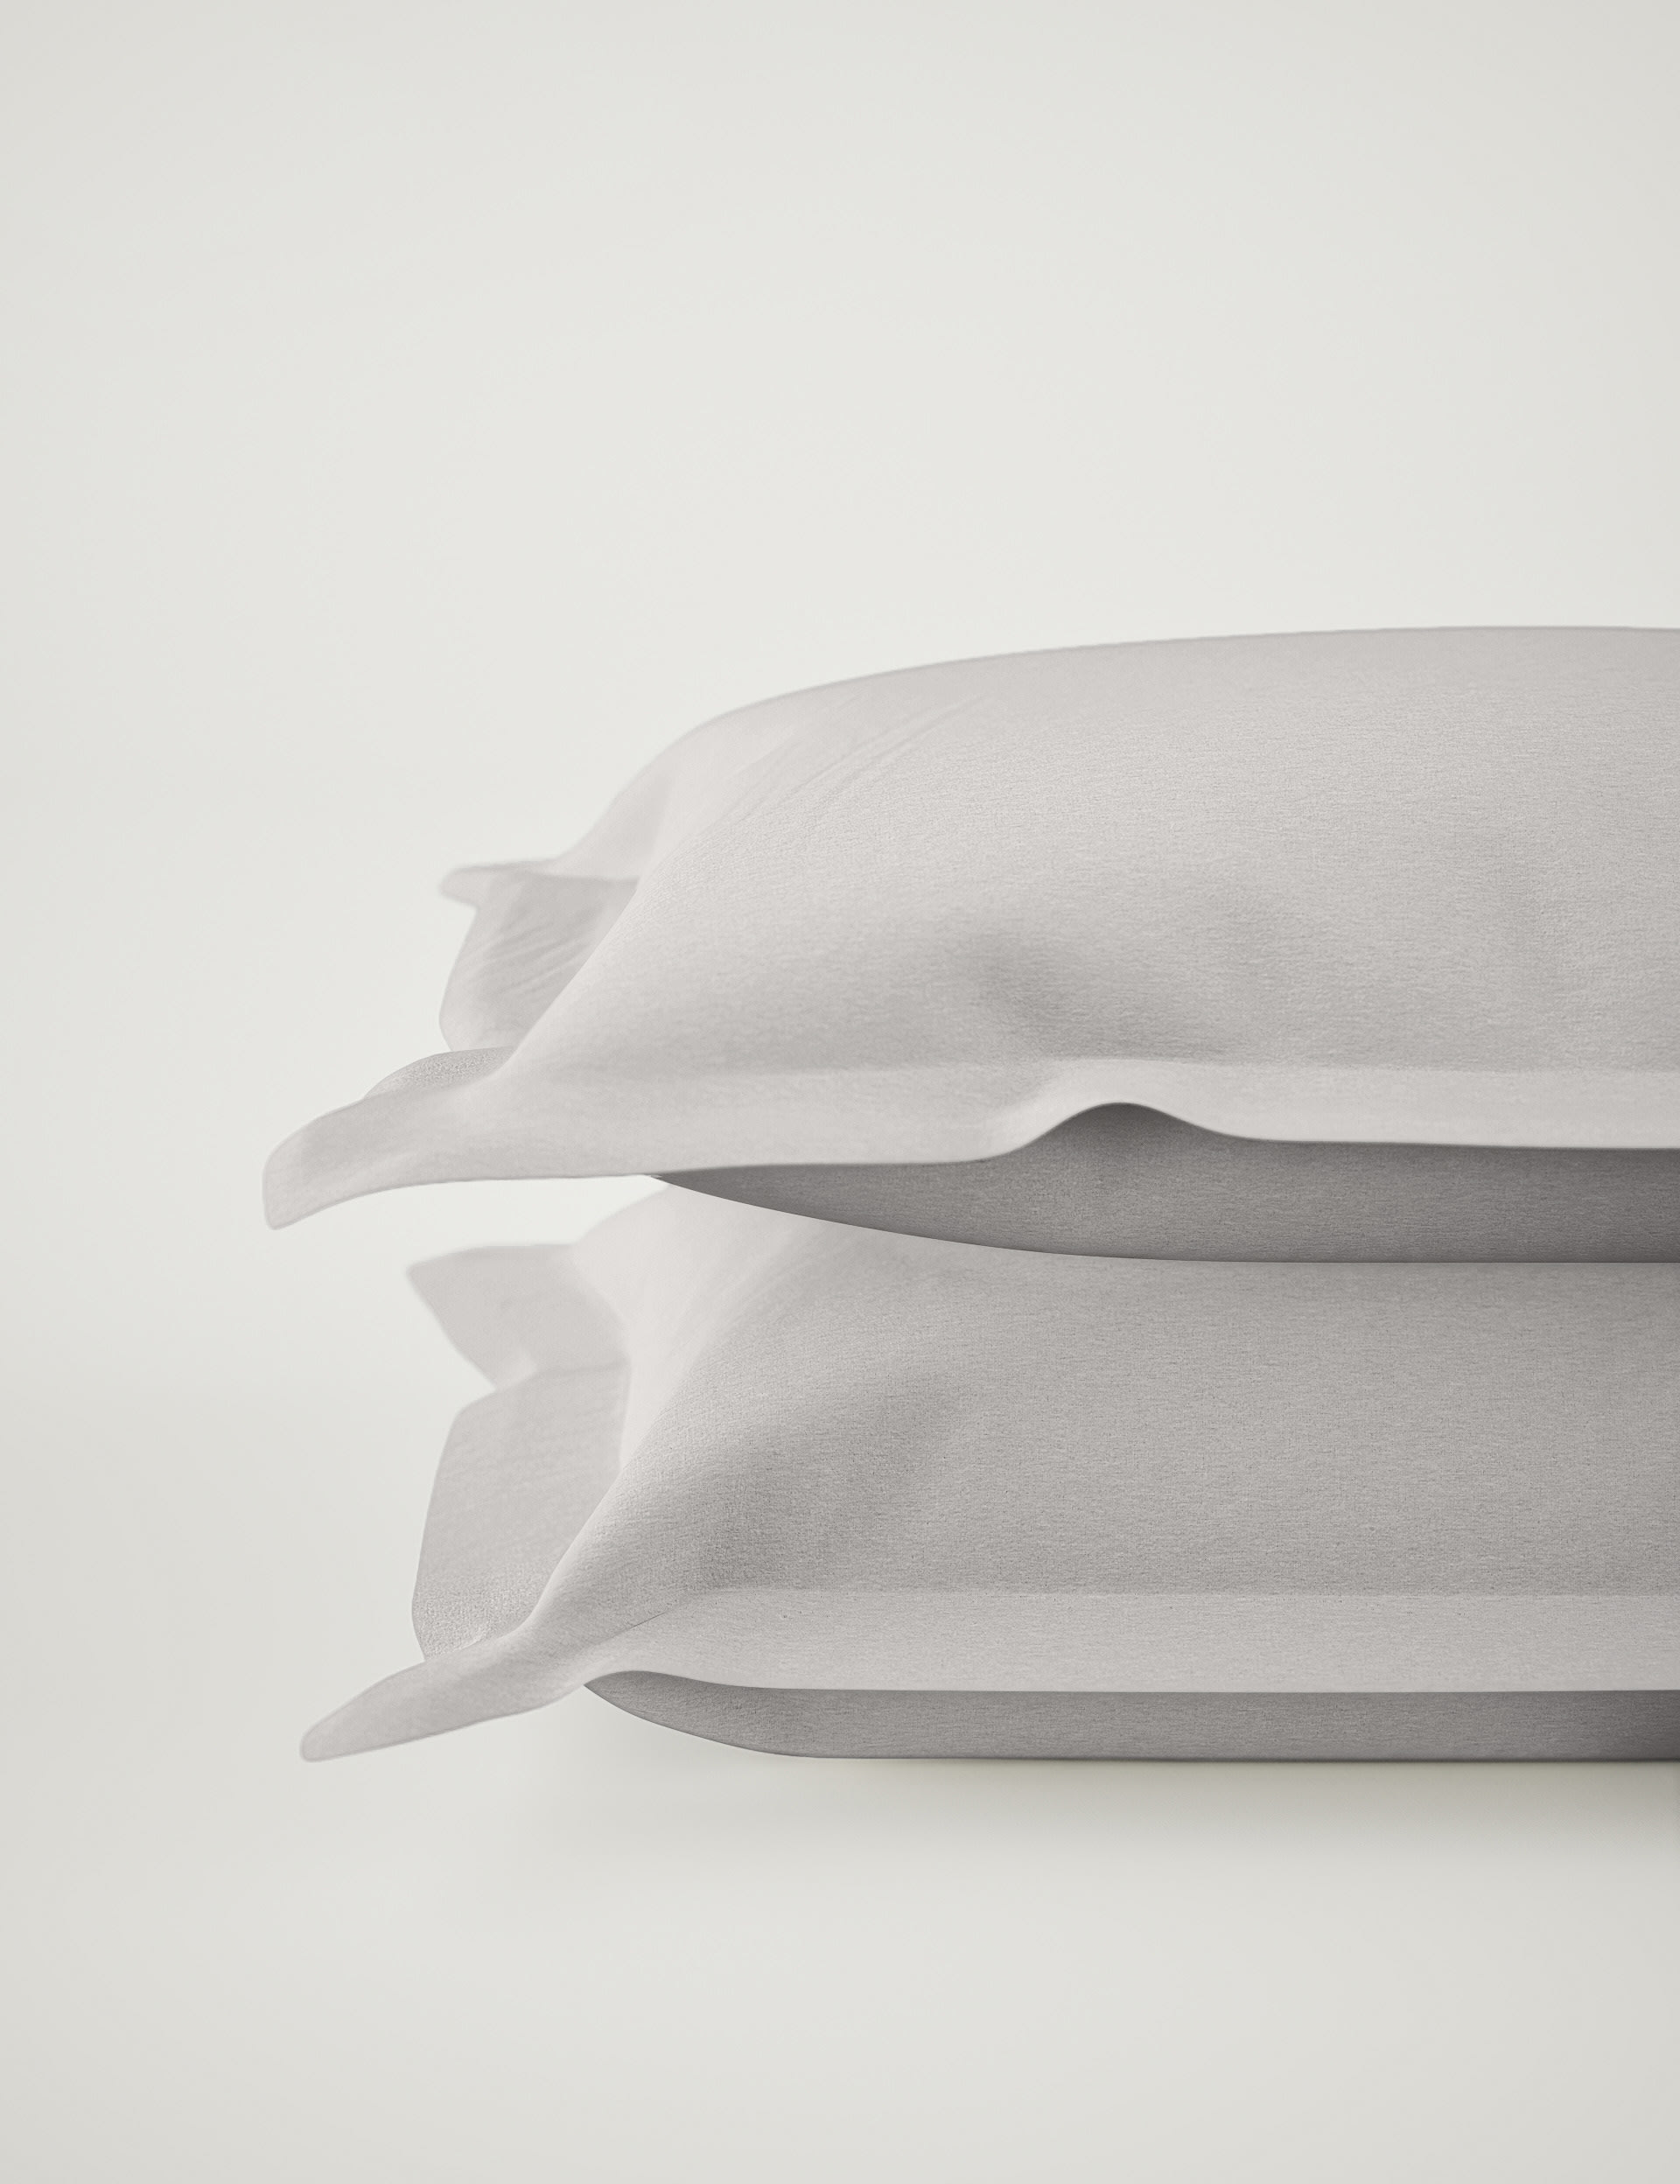 2pk Pure Brushed Cotton Oxford Pillowcases